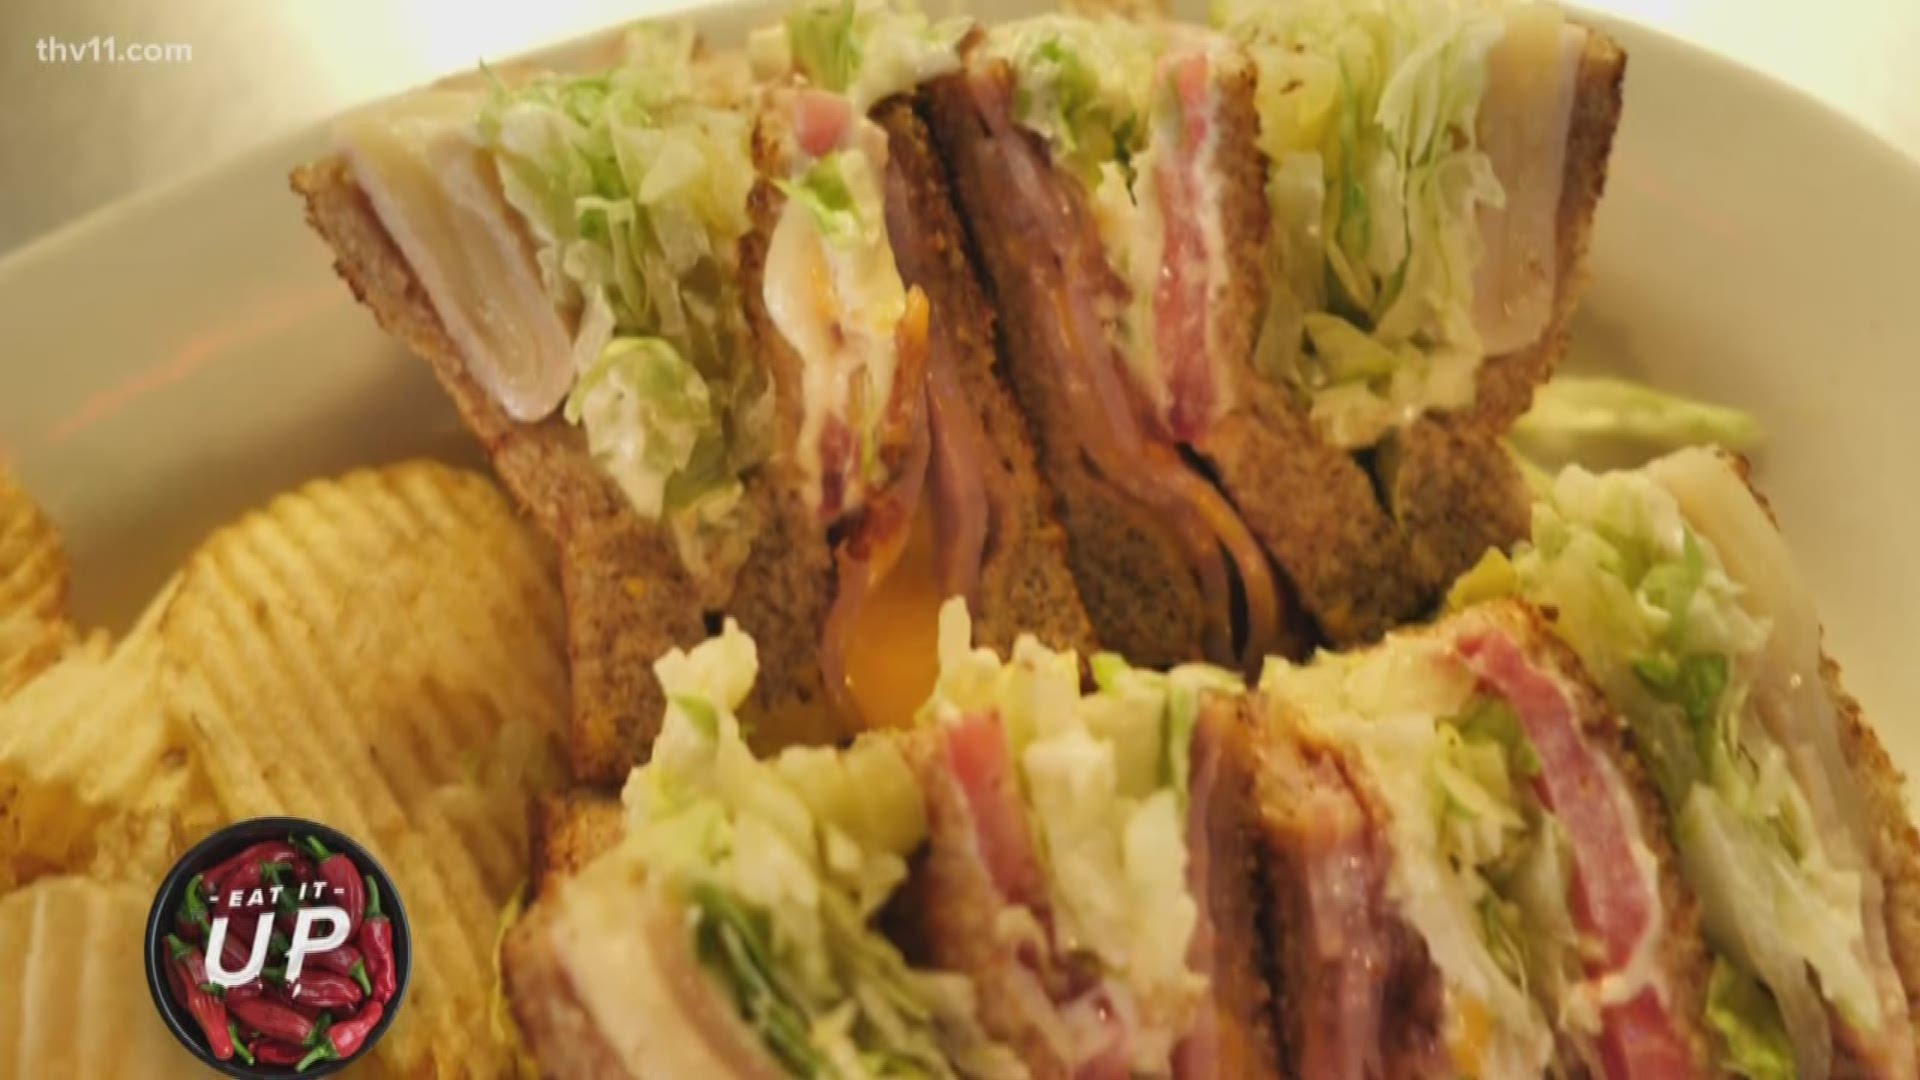 Gadwall’s is a family owned gem in North Little Rock winning a national award for their Club Sandwich. They also have one of the best Fried Bologna Sandwiches in Arkansas according to THV11 viewers!